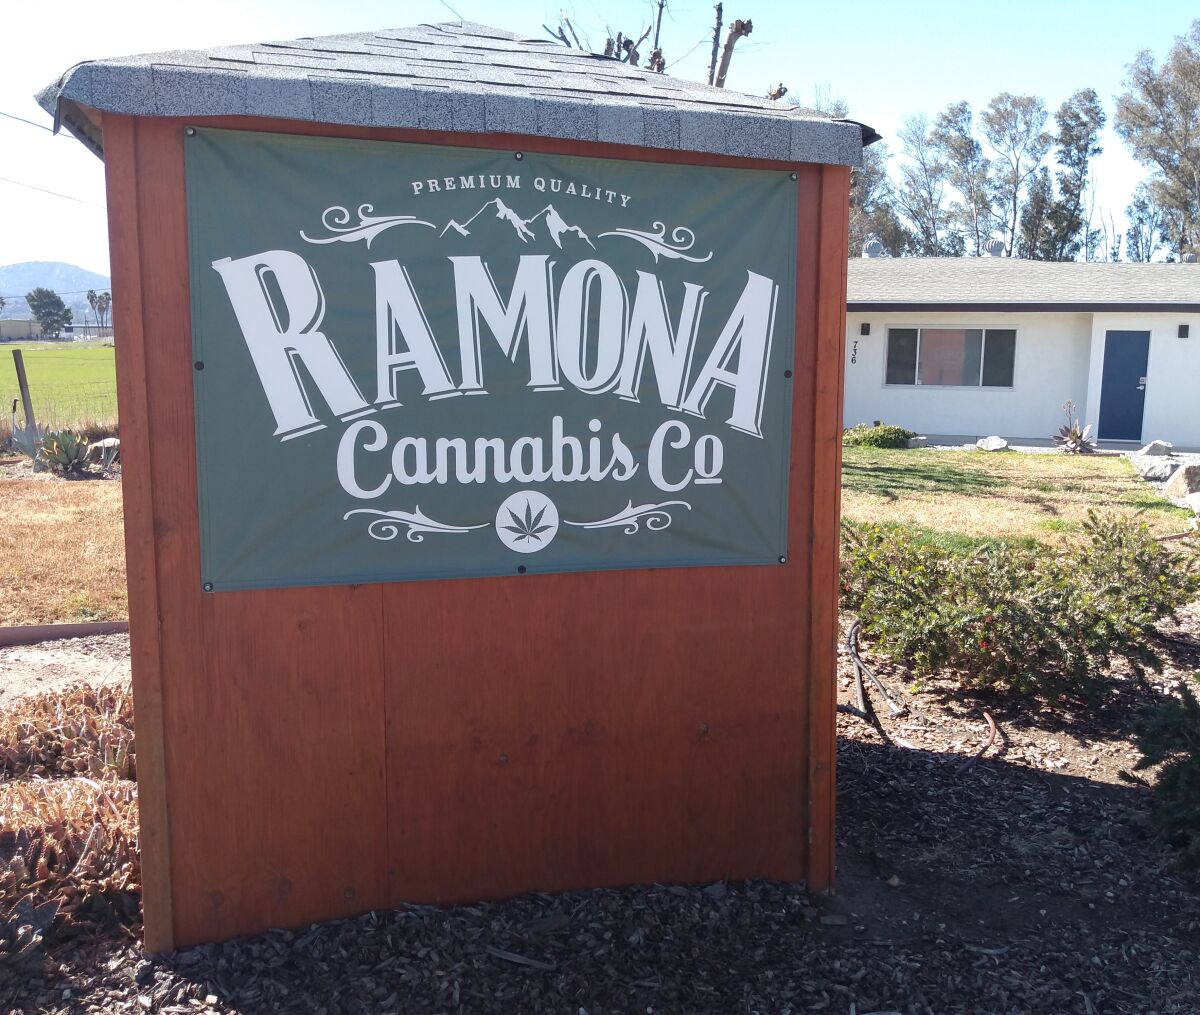 Ramona Cannabis Co. plans to add marijuana cultivation and manufacturing space to its building at 736 Montecito Way.